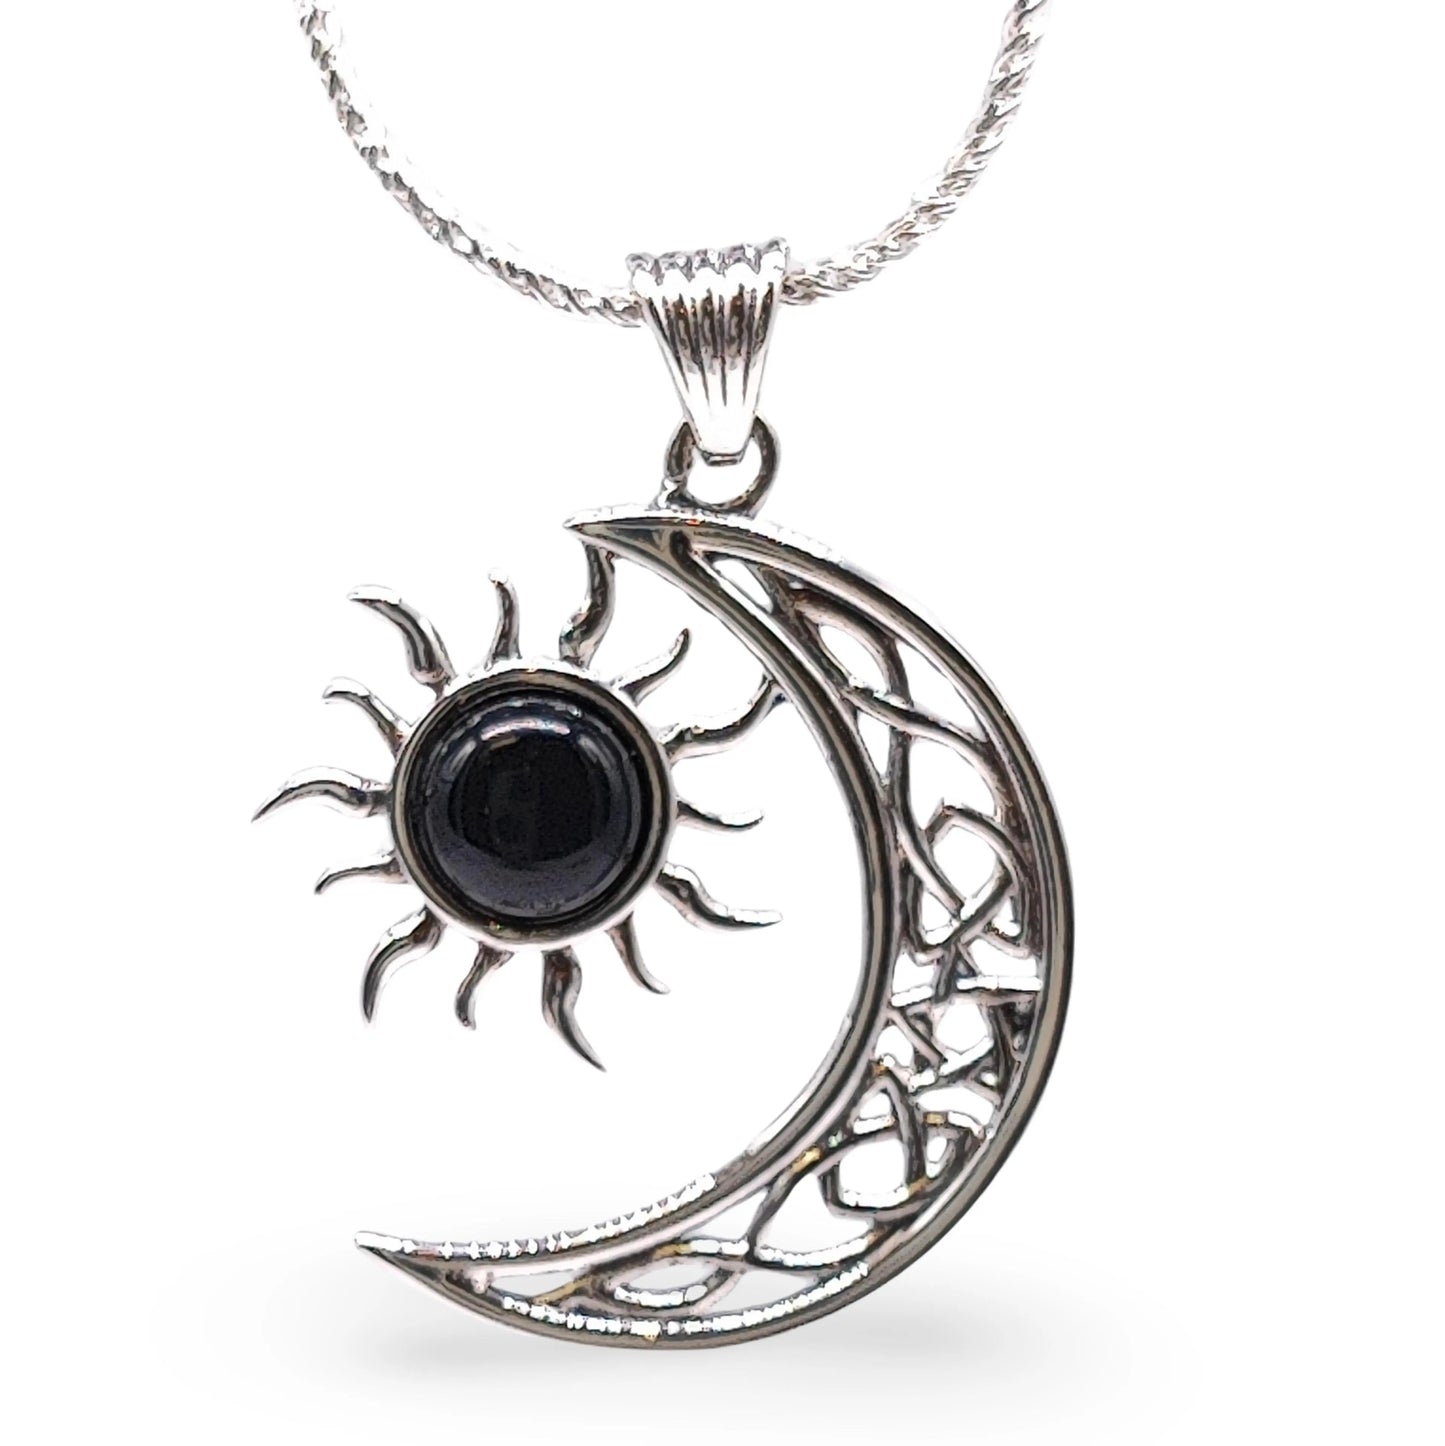 Necklace -925 Sterling Silver -Celtic Moon & Sun -Decorated with Gemstones - Arômes et Évasions